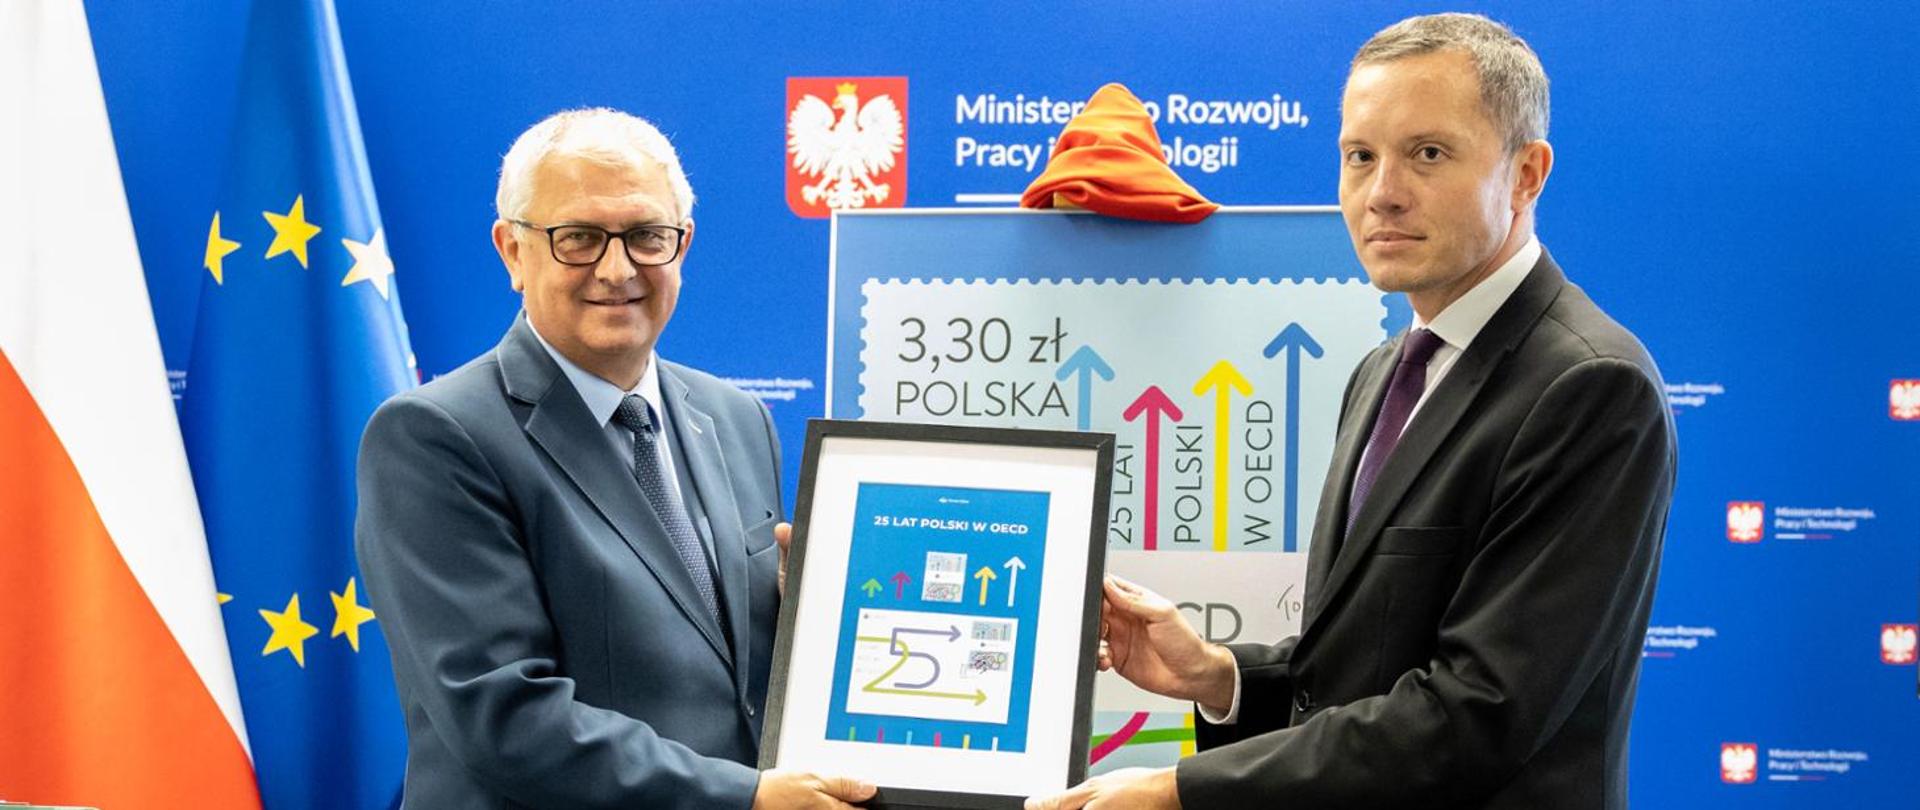 Grzegorz Piechowiak and Tomasz Zdzikot holding a frame with a commemorative stamp and an envelope. 